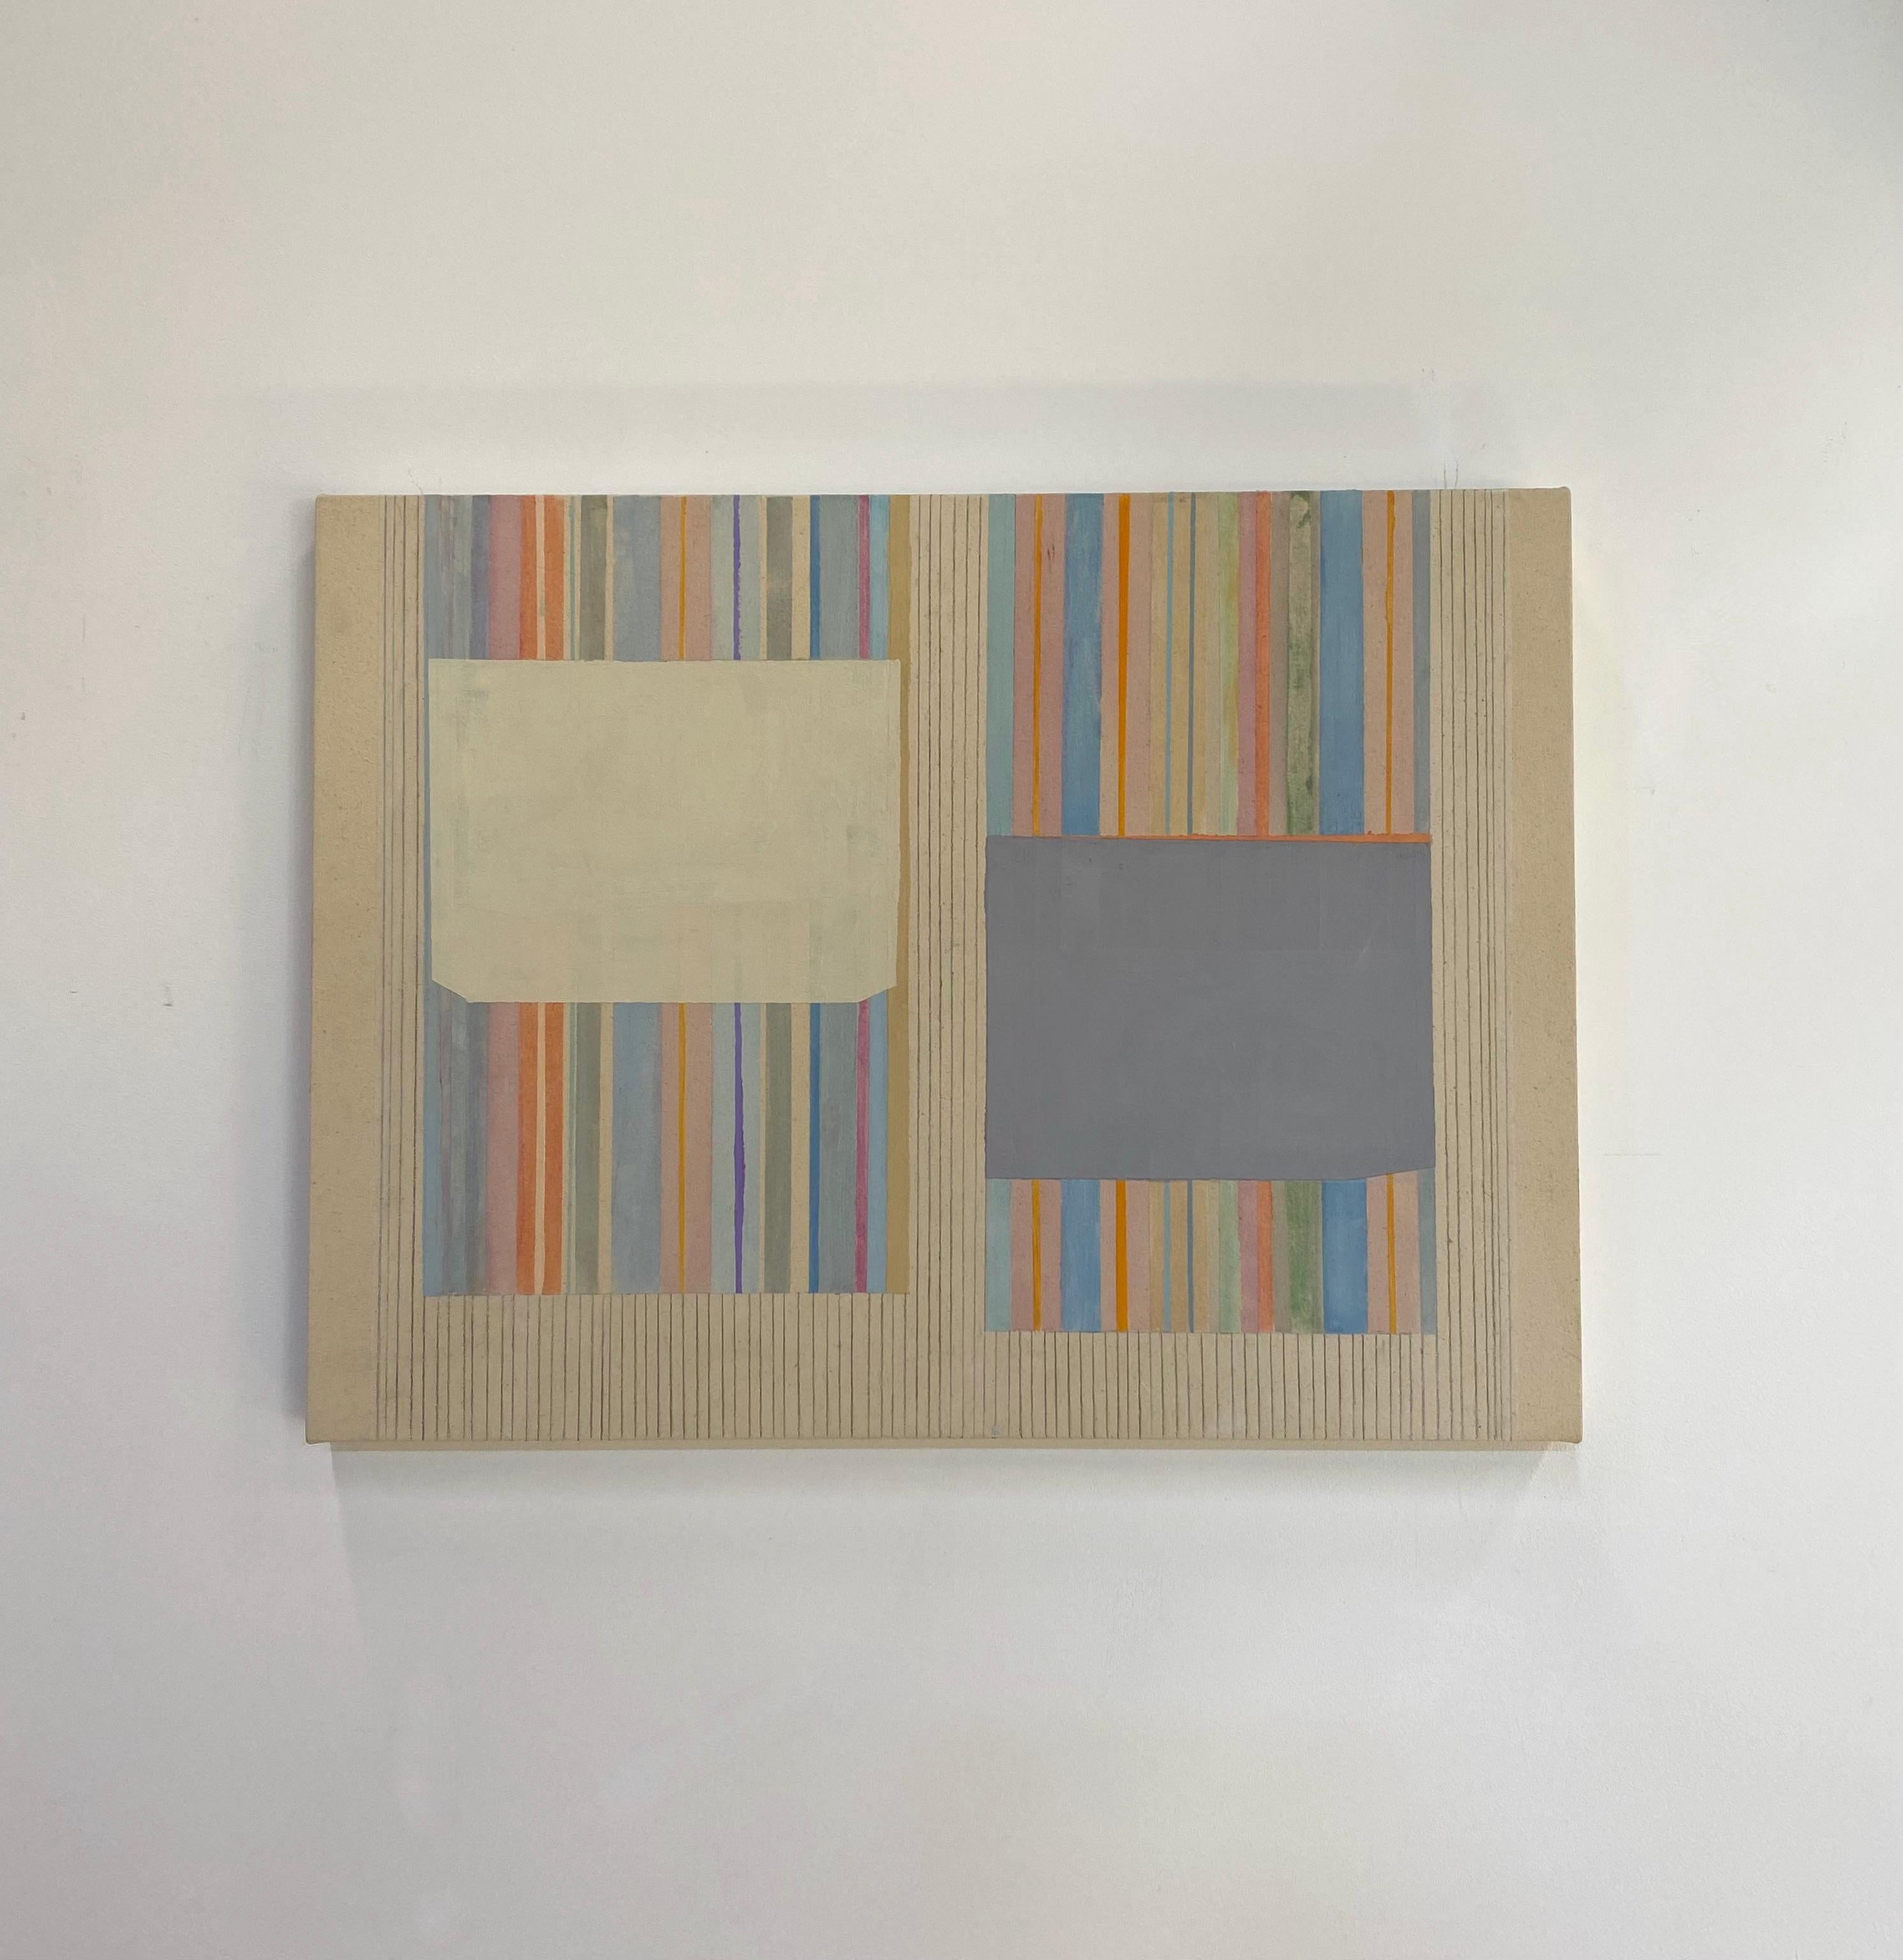 Clean and precise, carefully ordered stripes and blocks of color in orange, green, pale lemon yellow, gray, blue, purple and brown are lively and vibrant against the soft beige background. Signed, dated and titled on verso.

Elizabeth Gourlay’s work